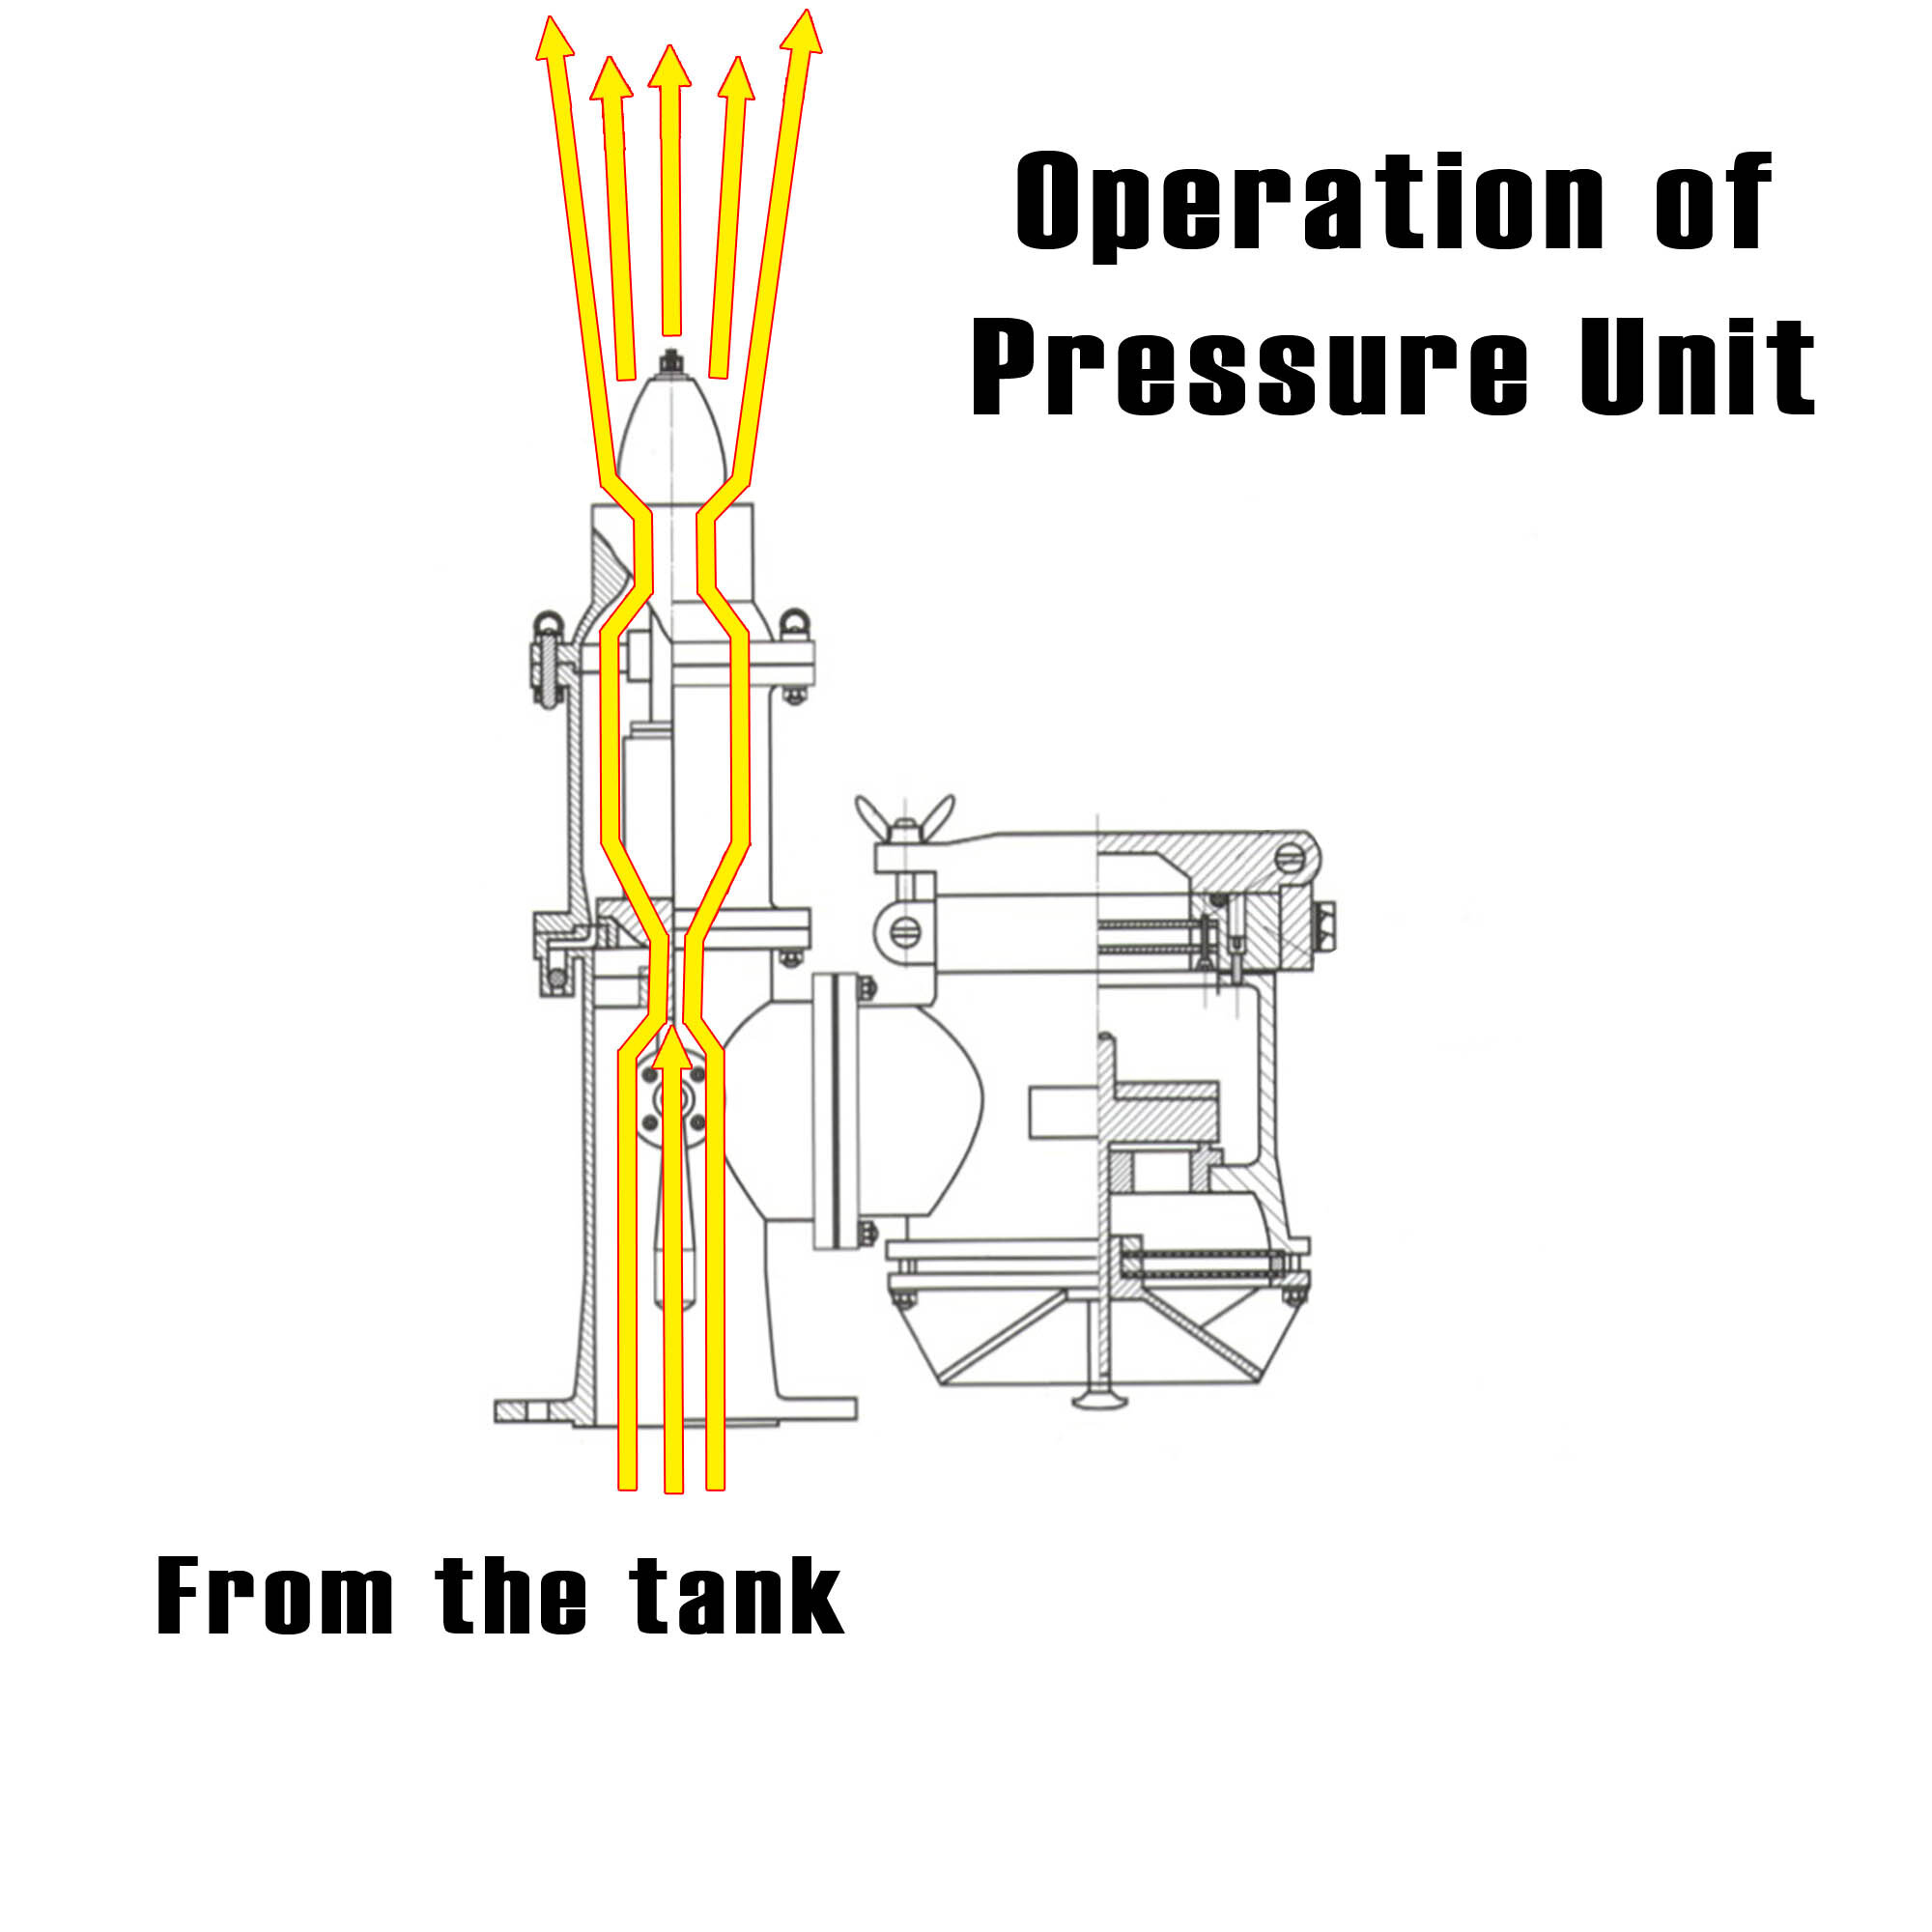 Operation of Pressure Unit of a P/V Valve showing the arrow that represents the path of the gasses flowing from the tank and releasing into the atmosphere.